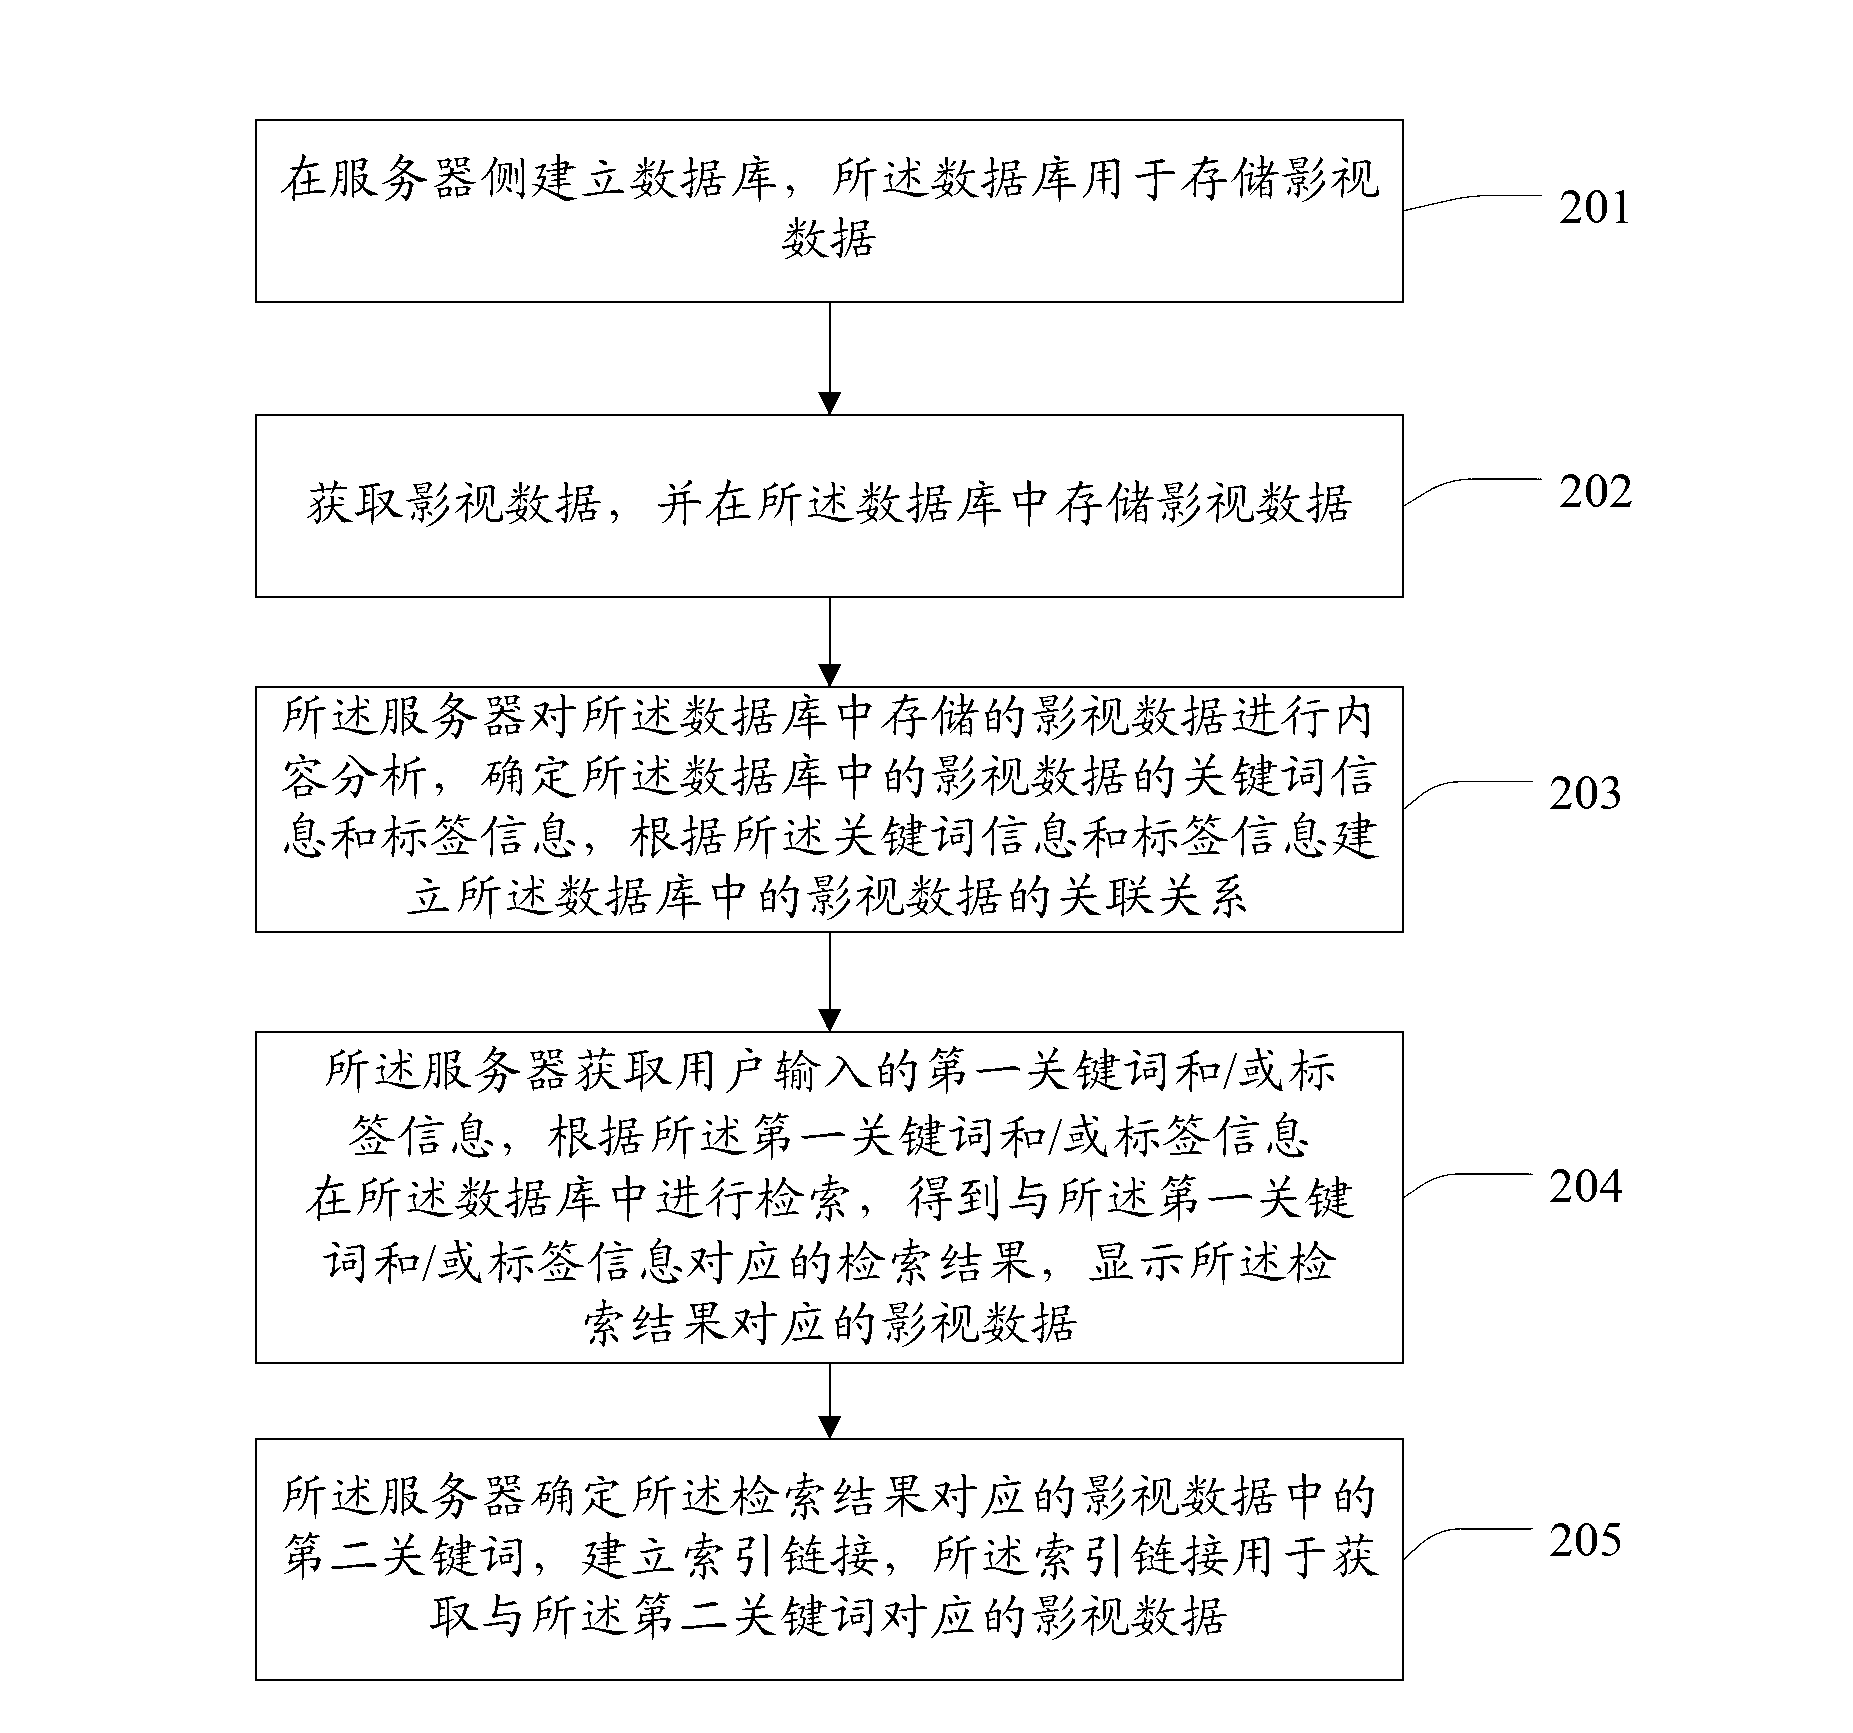 Method and device for retrieving film and television data